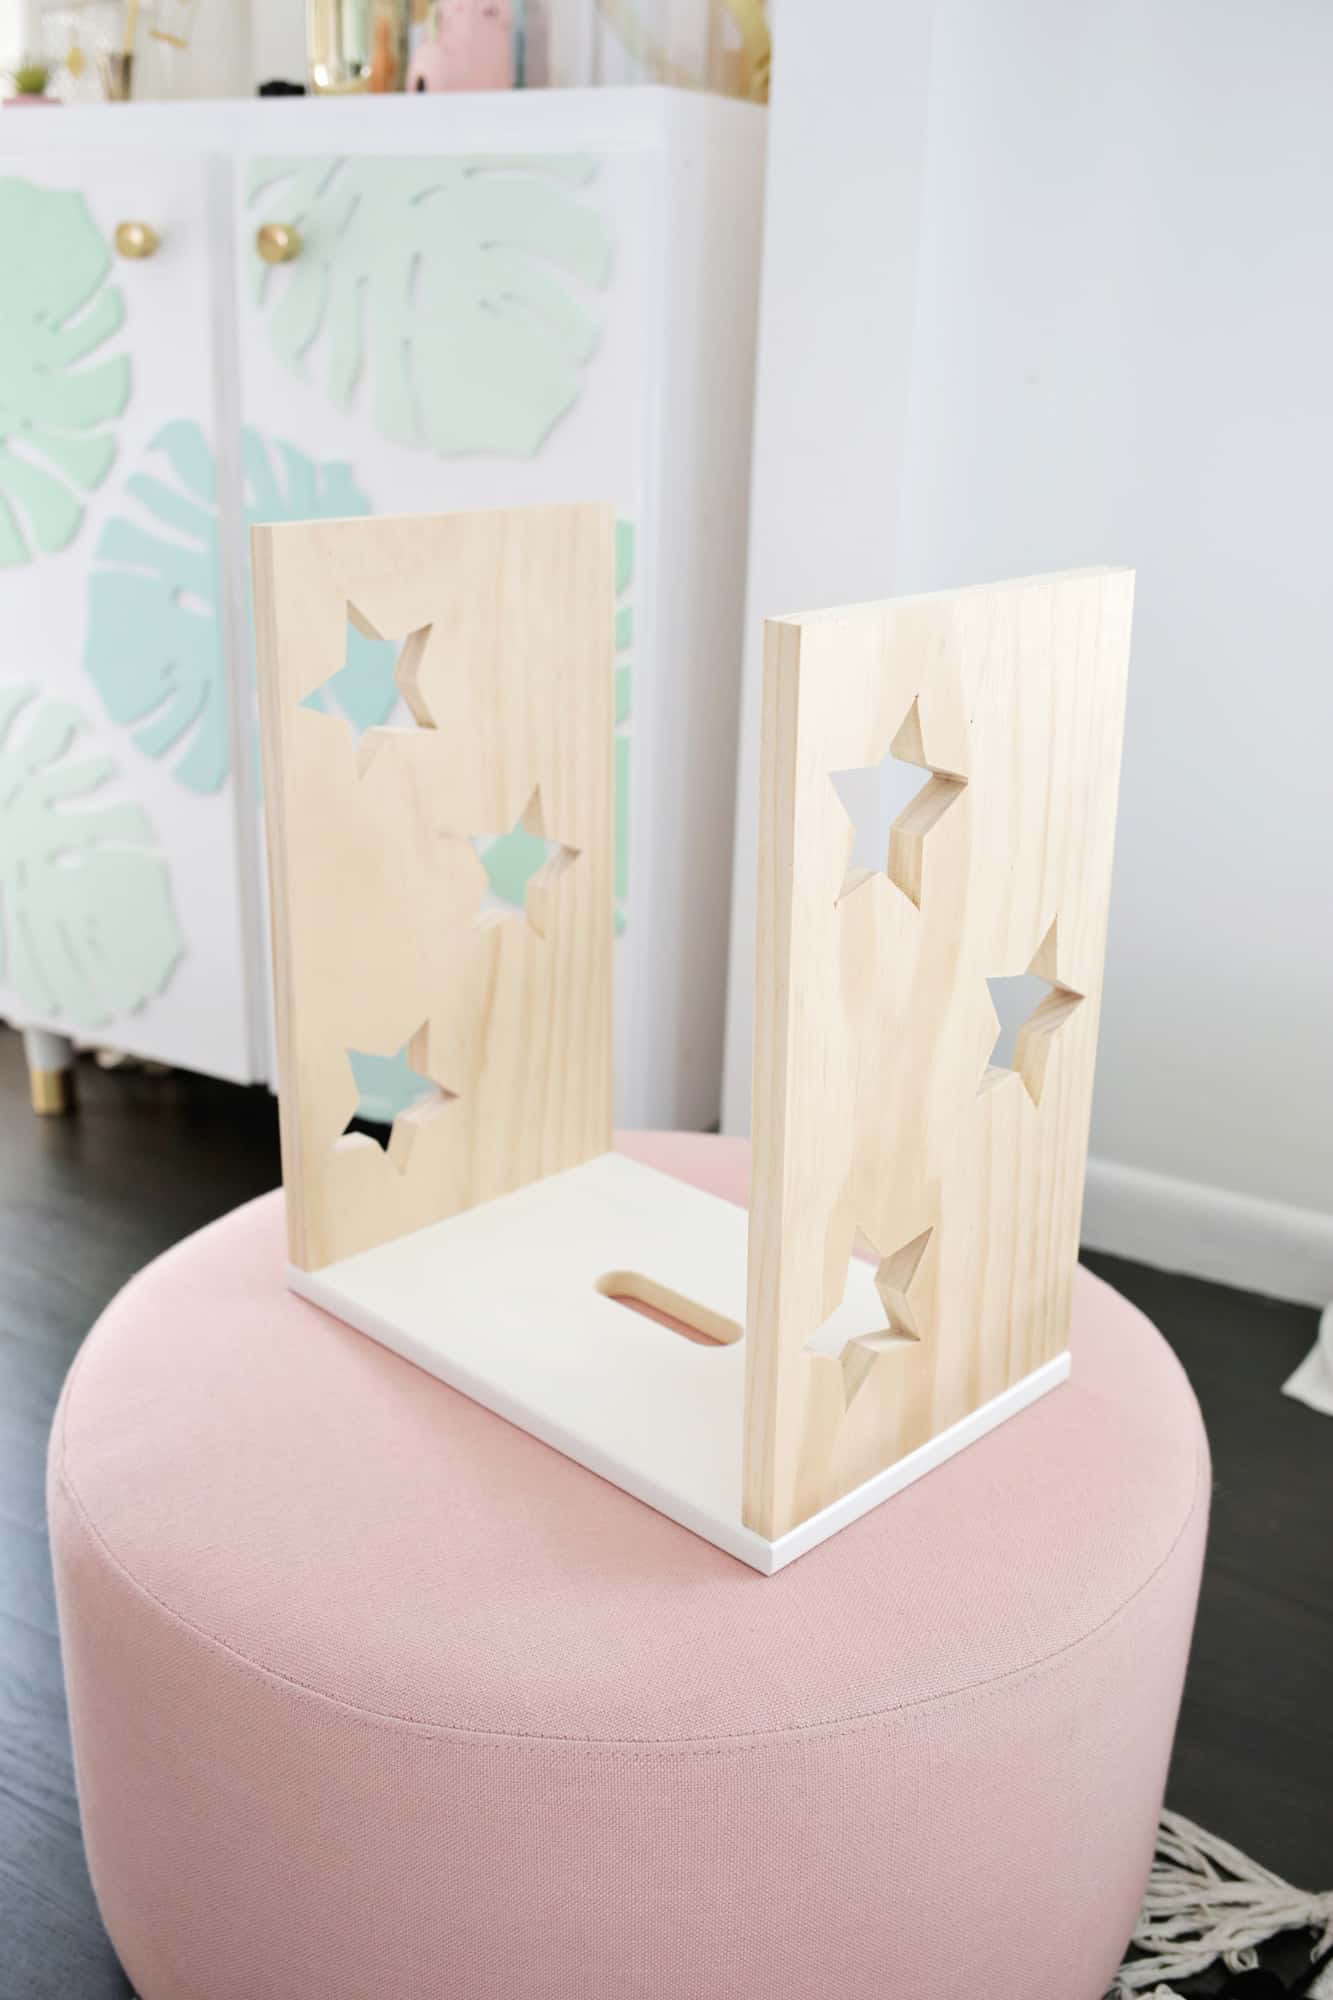 3 pieces of rectangle wood nailed together with 3 stars cut out on 2 sides on a pink ottoman